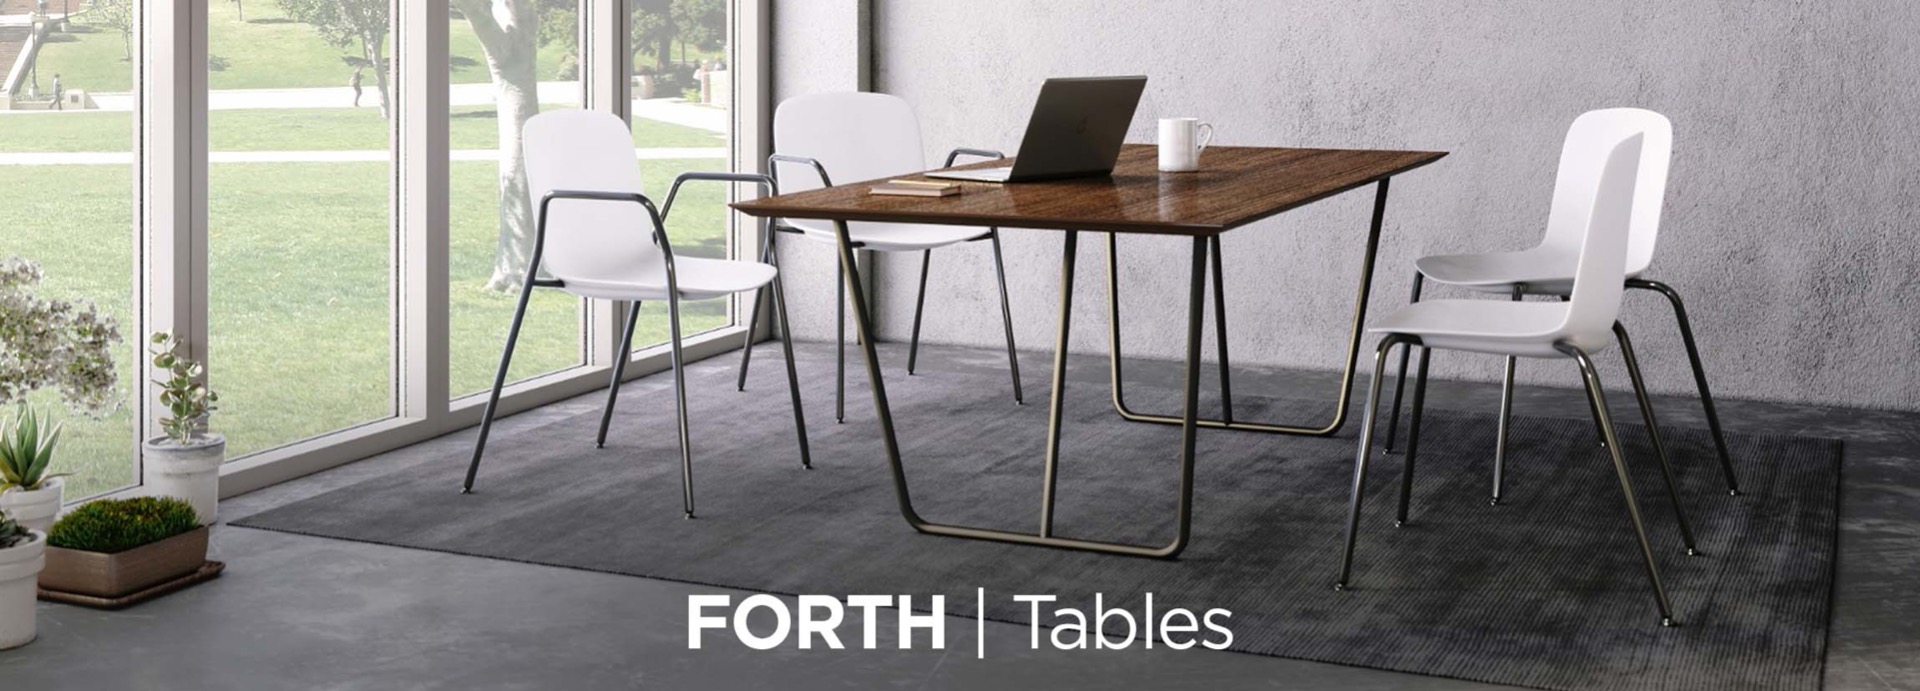 Thonet Forth Tables